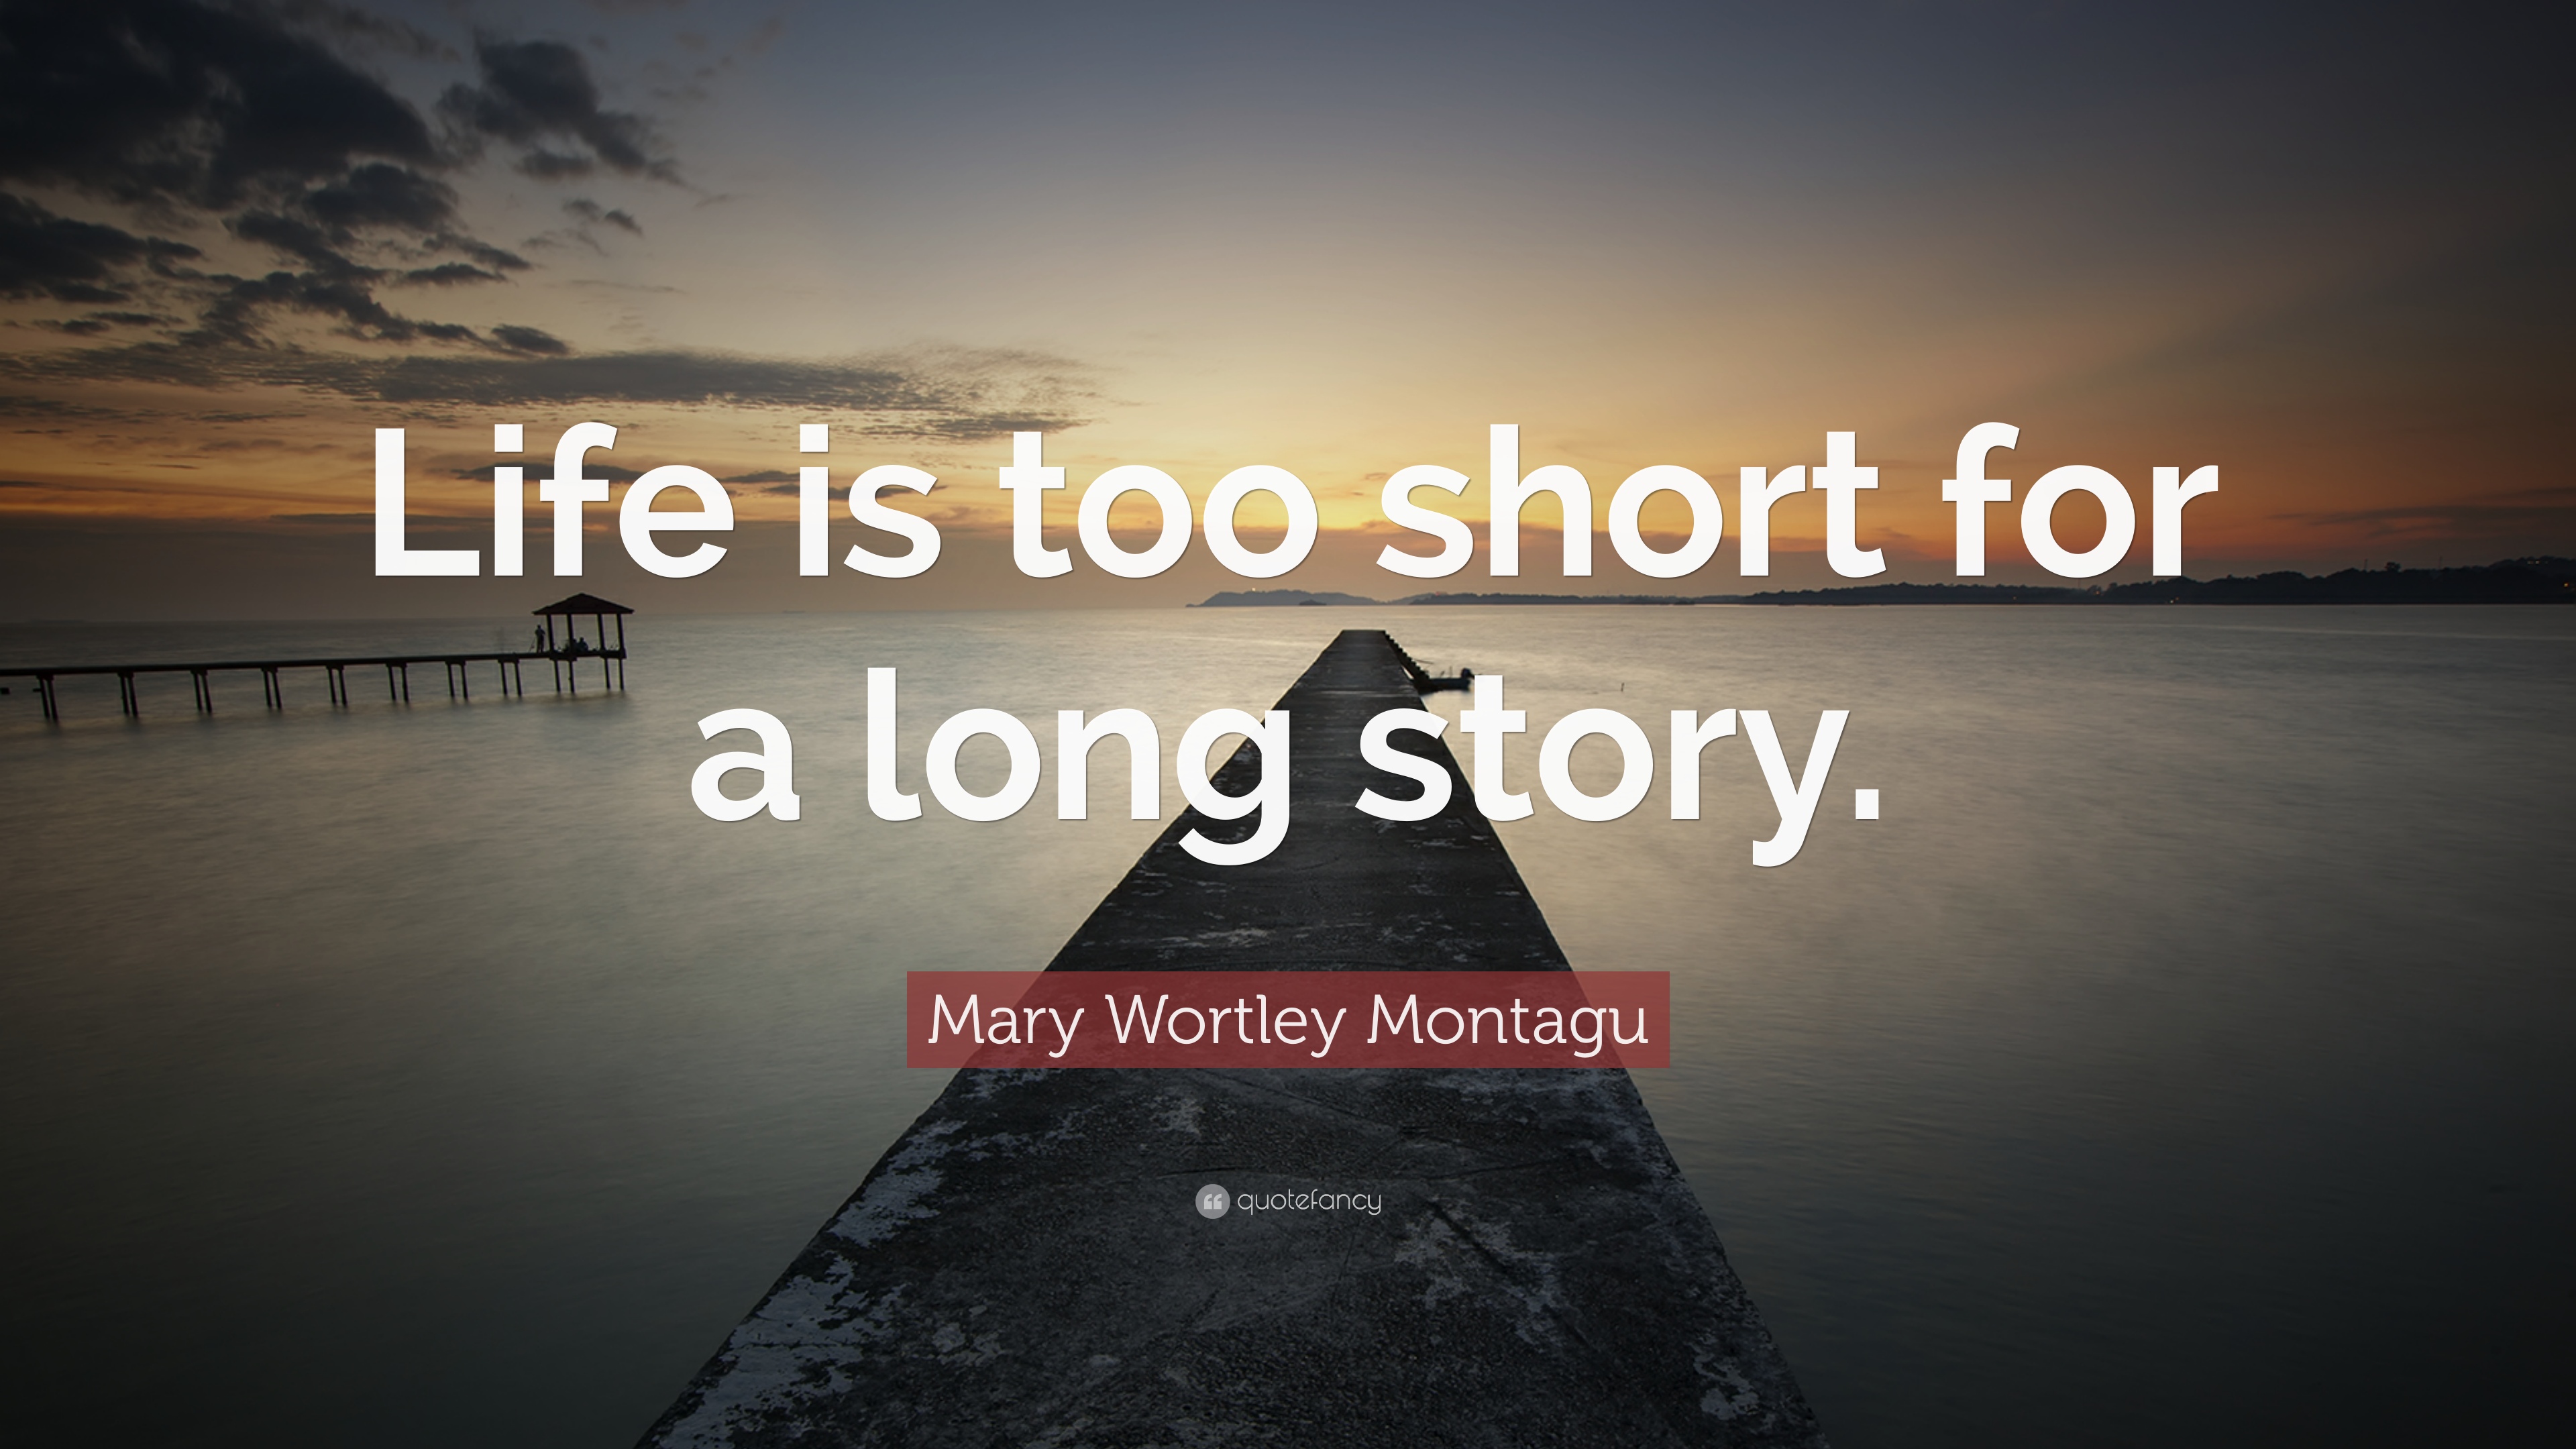 Mary Wortley Montagu Quote: “Life is too short for a long